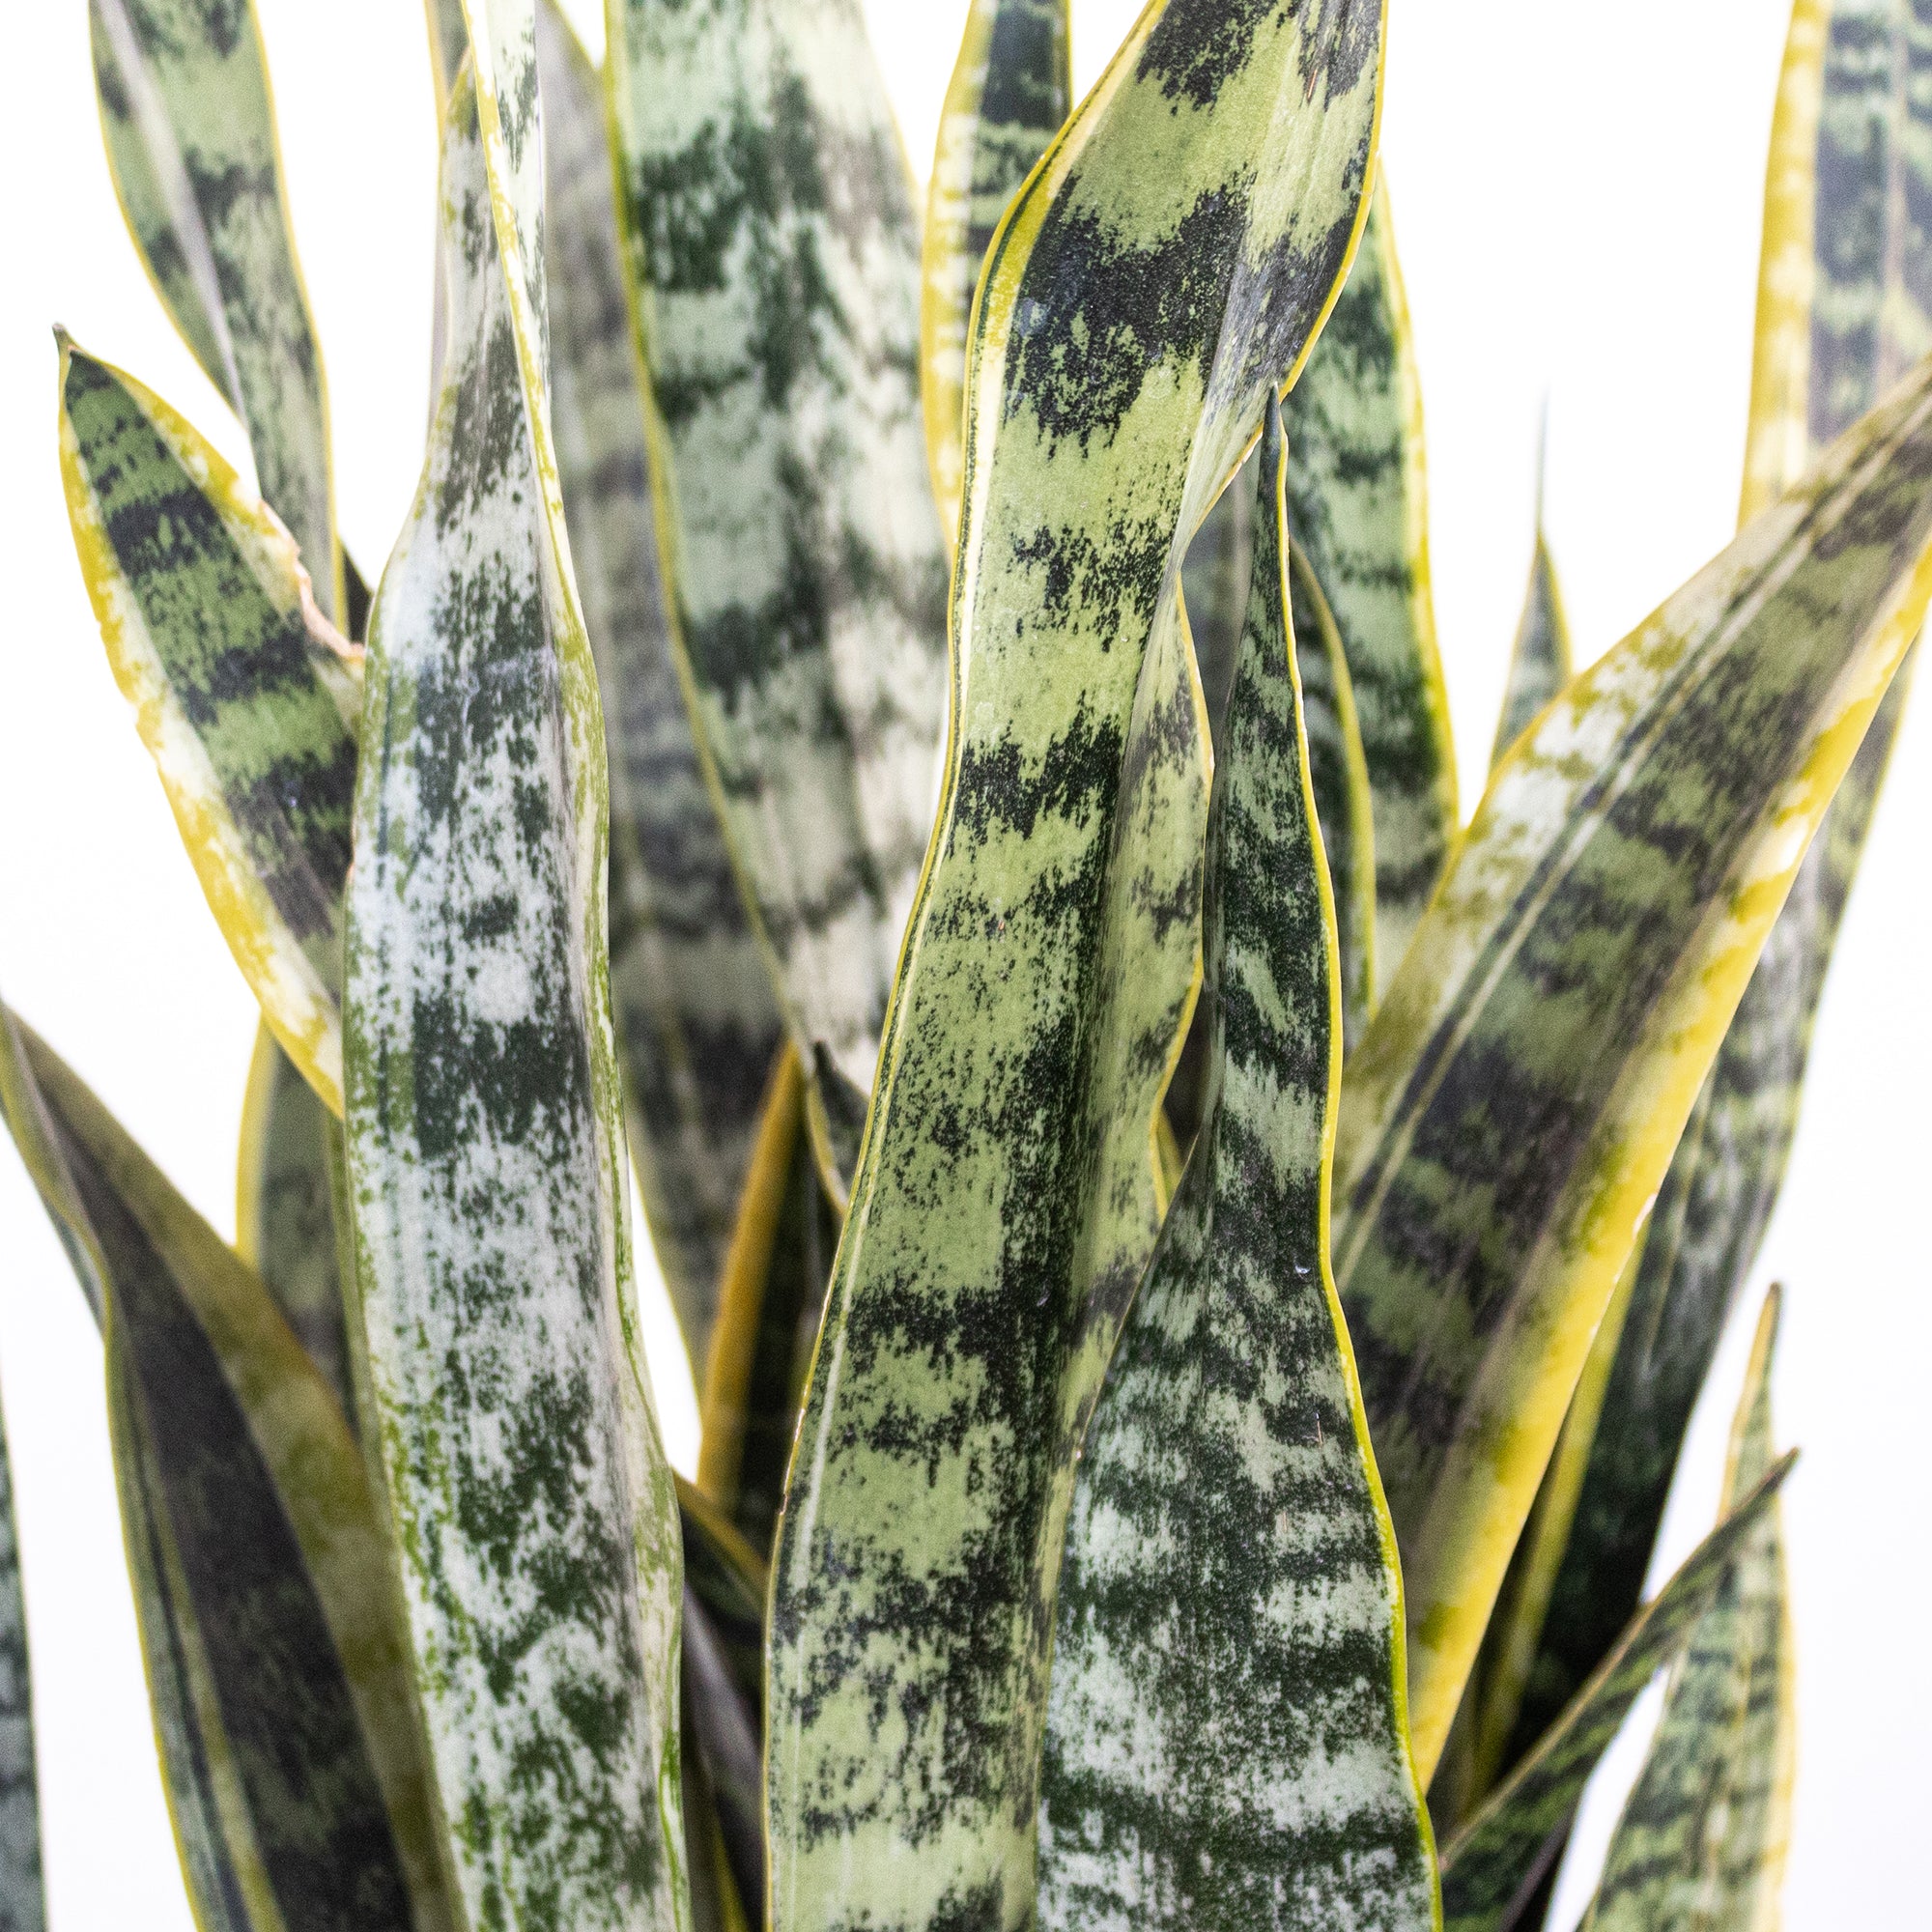 United Nursery Live Sansevieria Laurentii Plant 22-30 Inches Tall in 9.25 Inch Grower Pot